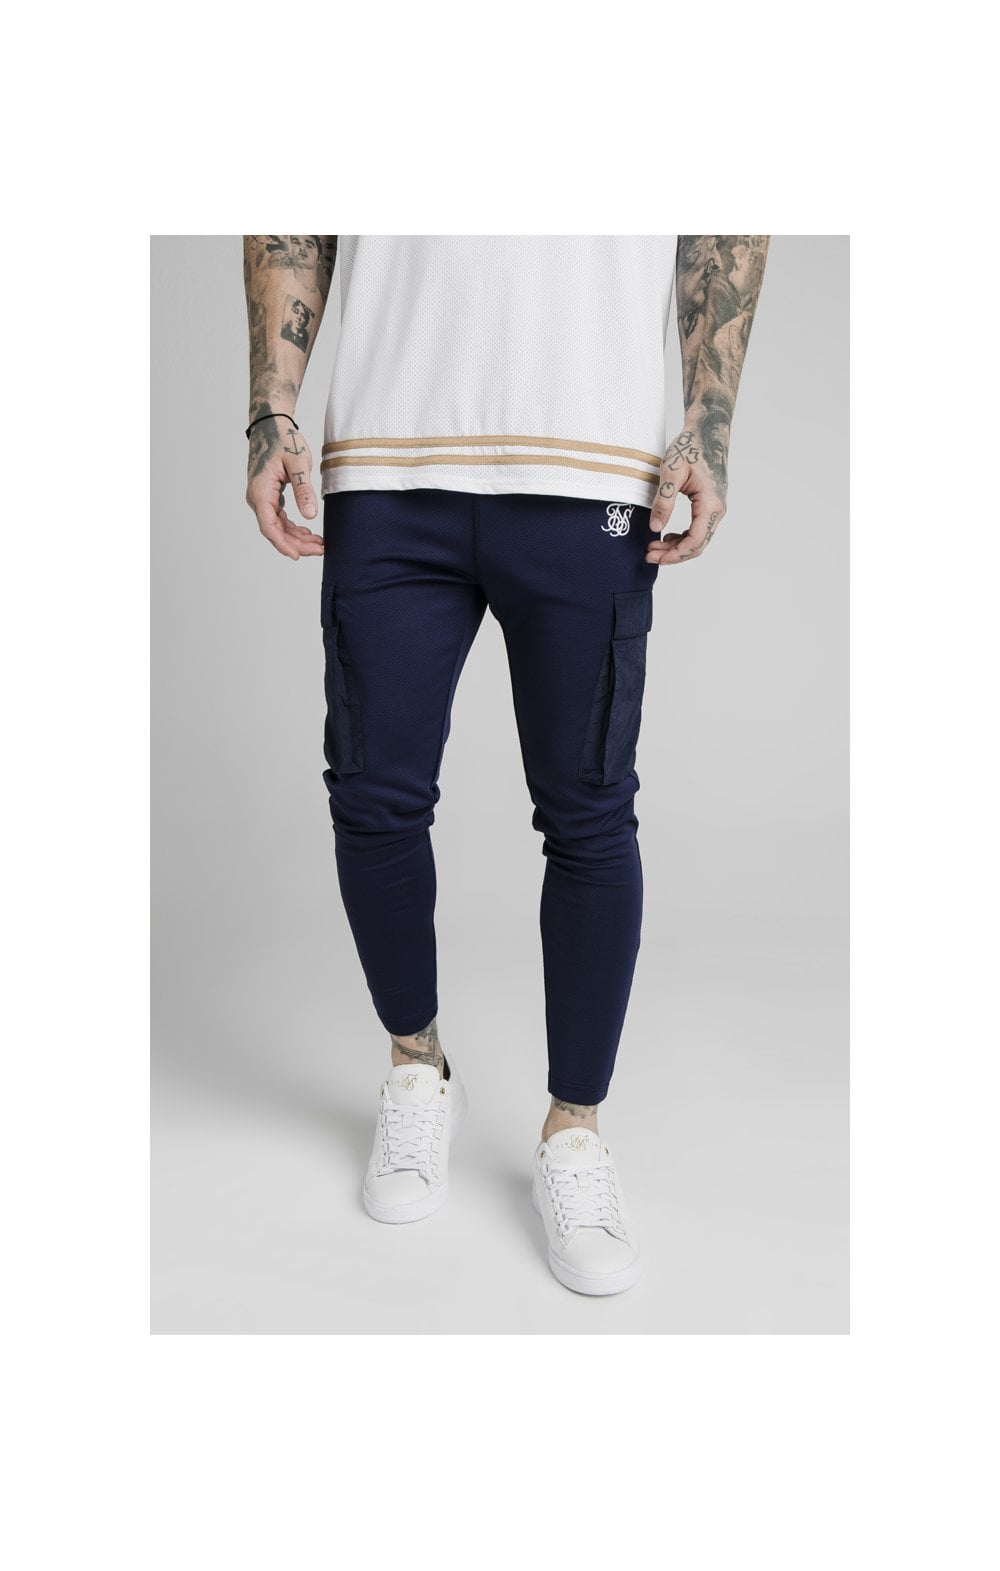 Load image into Gallery viewer, SikSilk Crushed Nylon Cargo Pants - Navy (1)